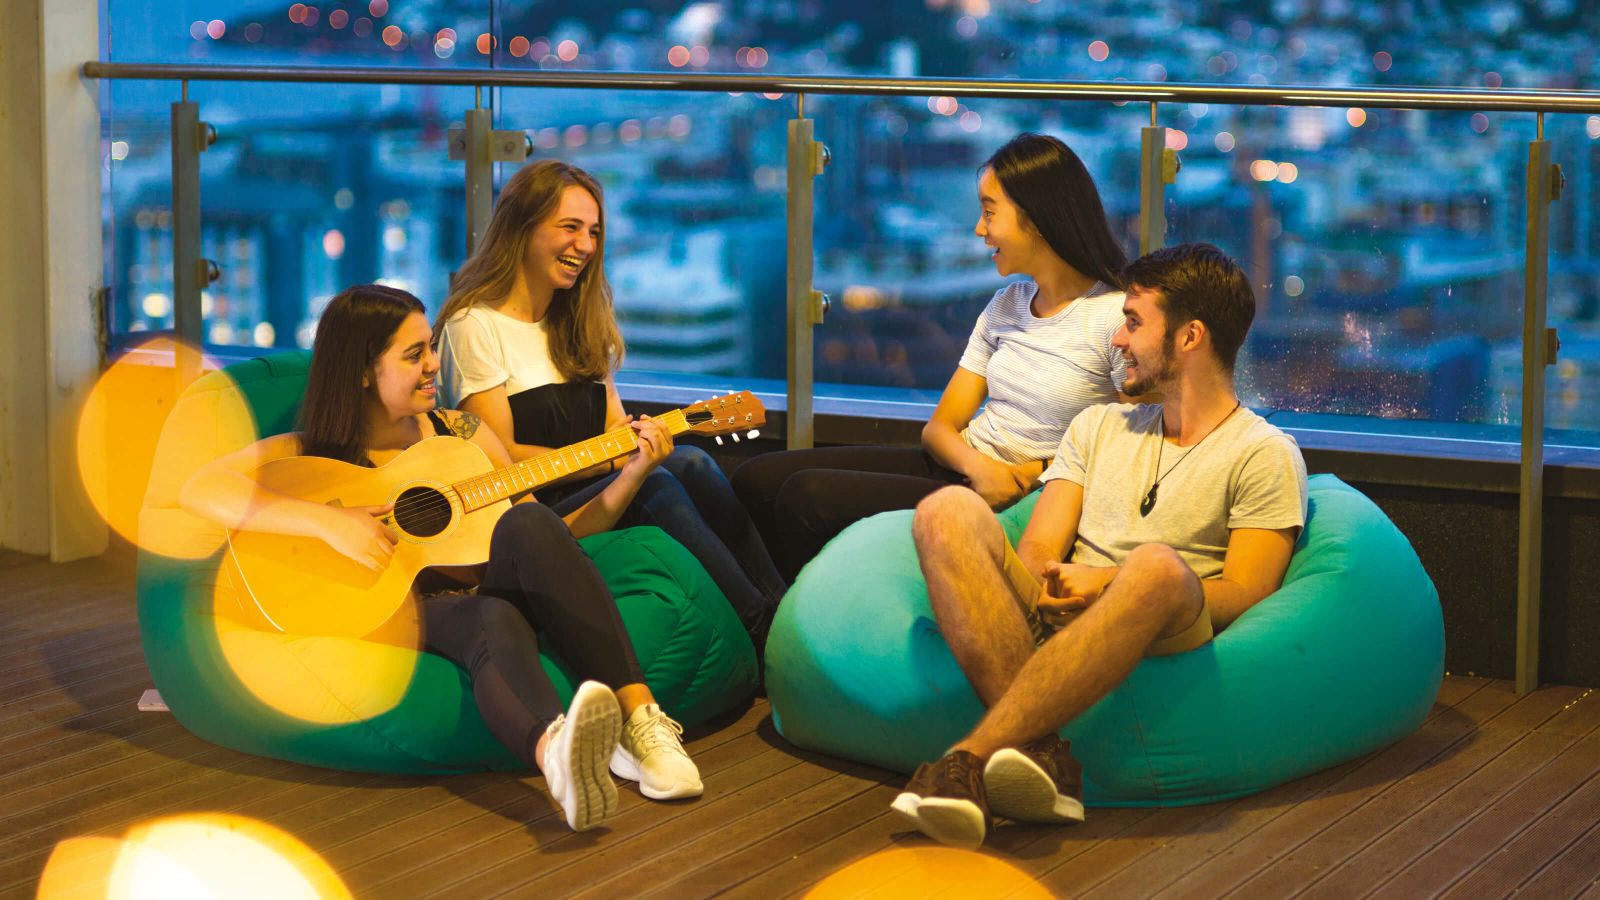 Students relaxing on bean bags on a balcony at one of University’s halls of residence.